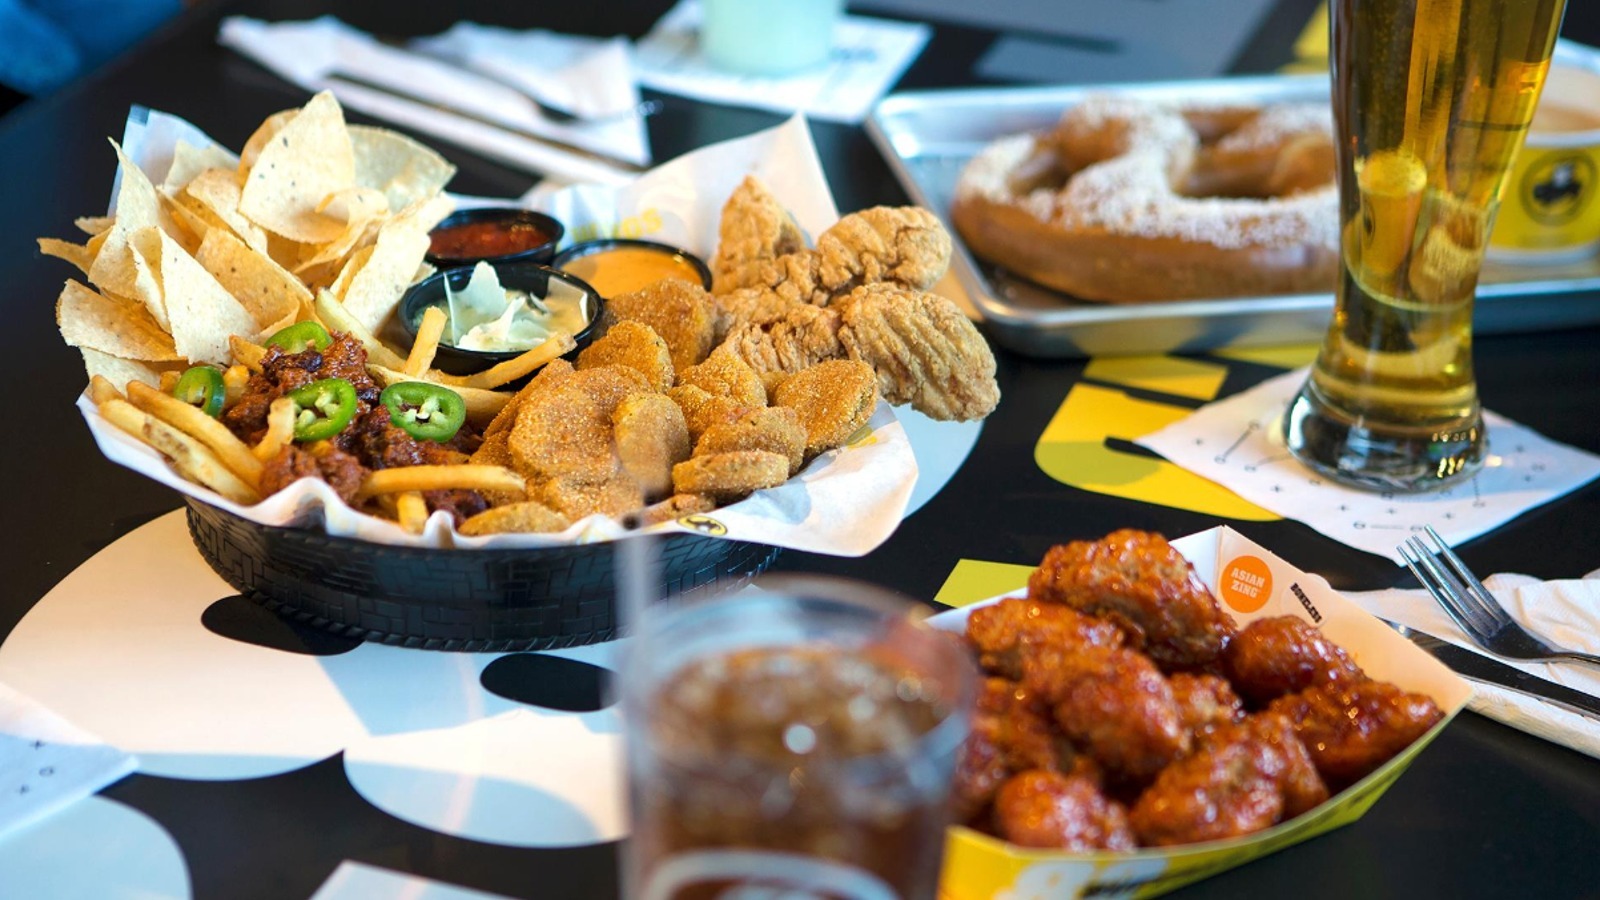 Things You Should Never Order At Buffalo Wild Wings